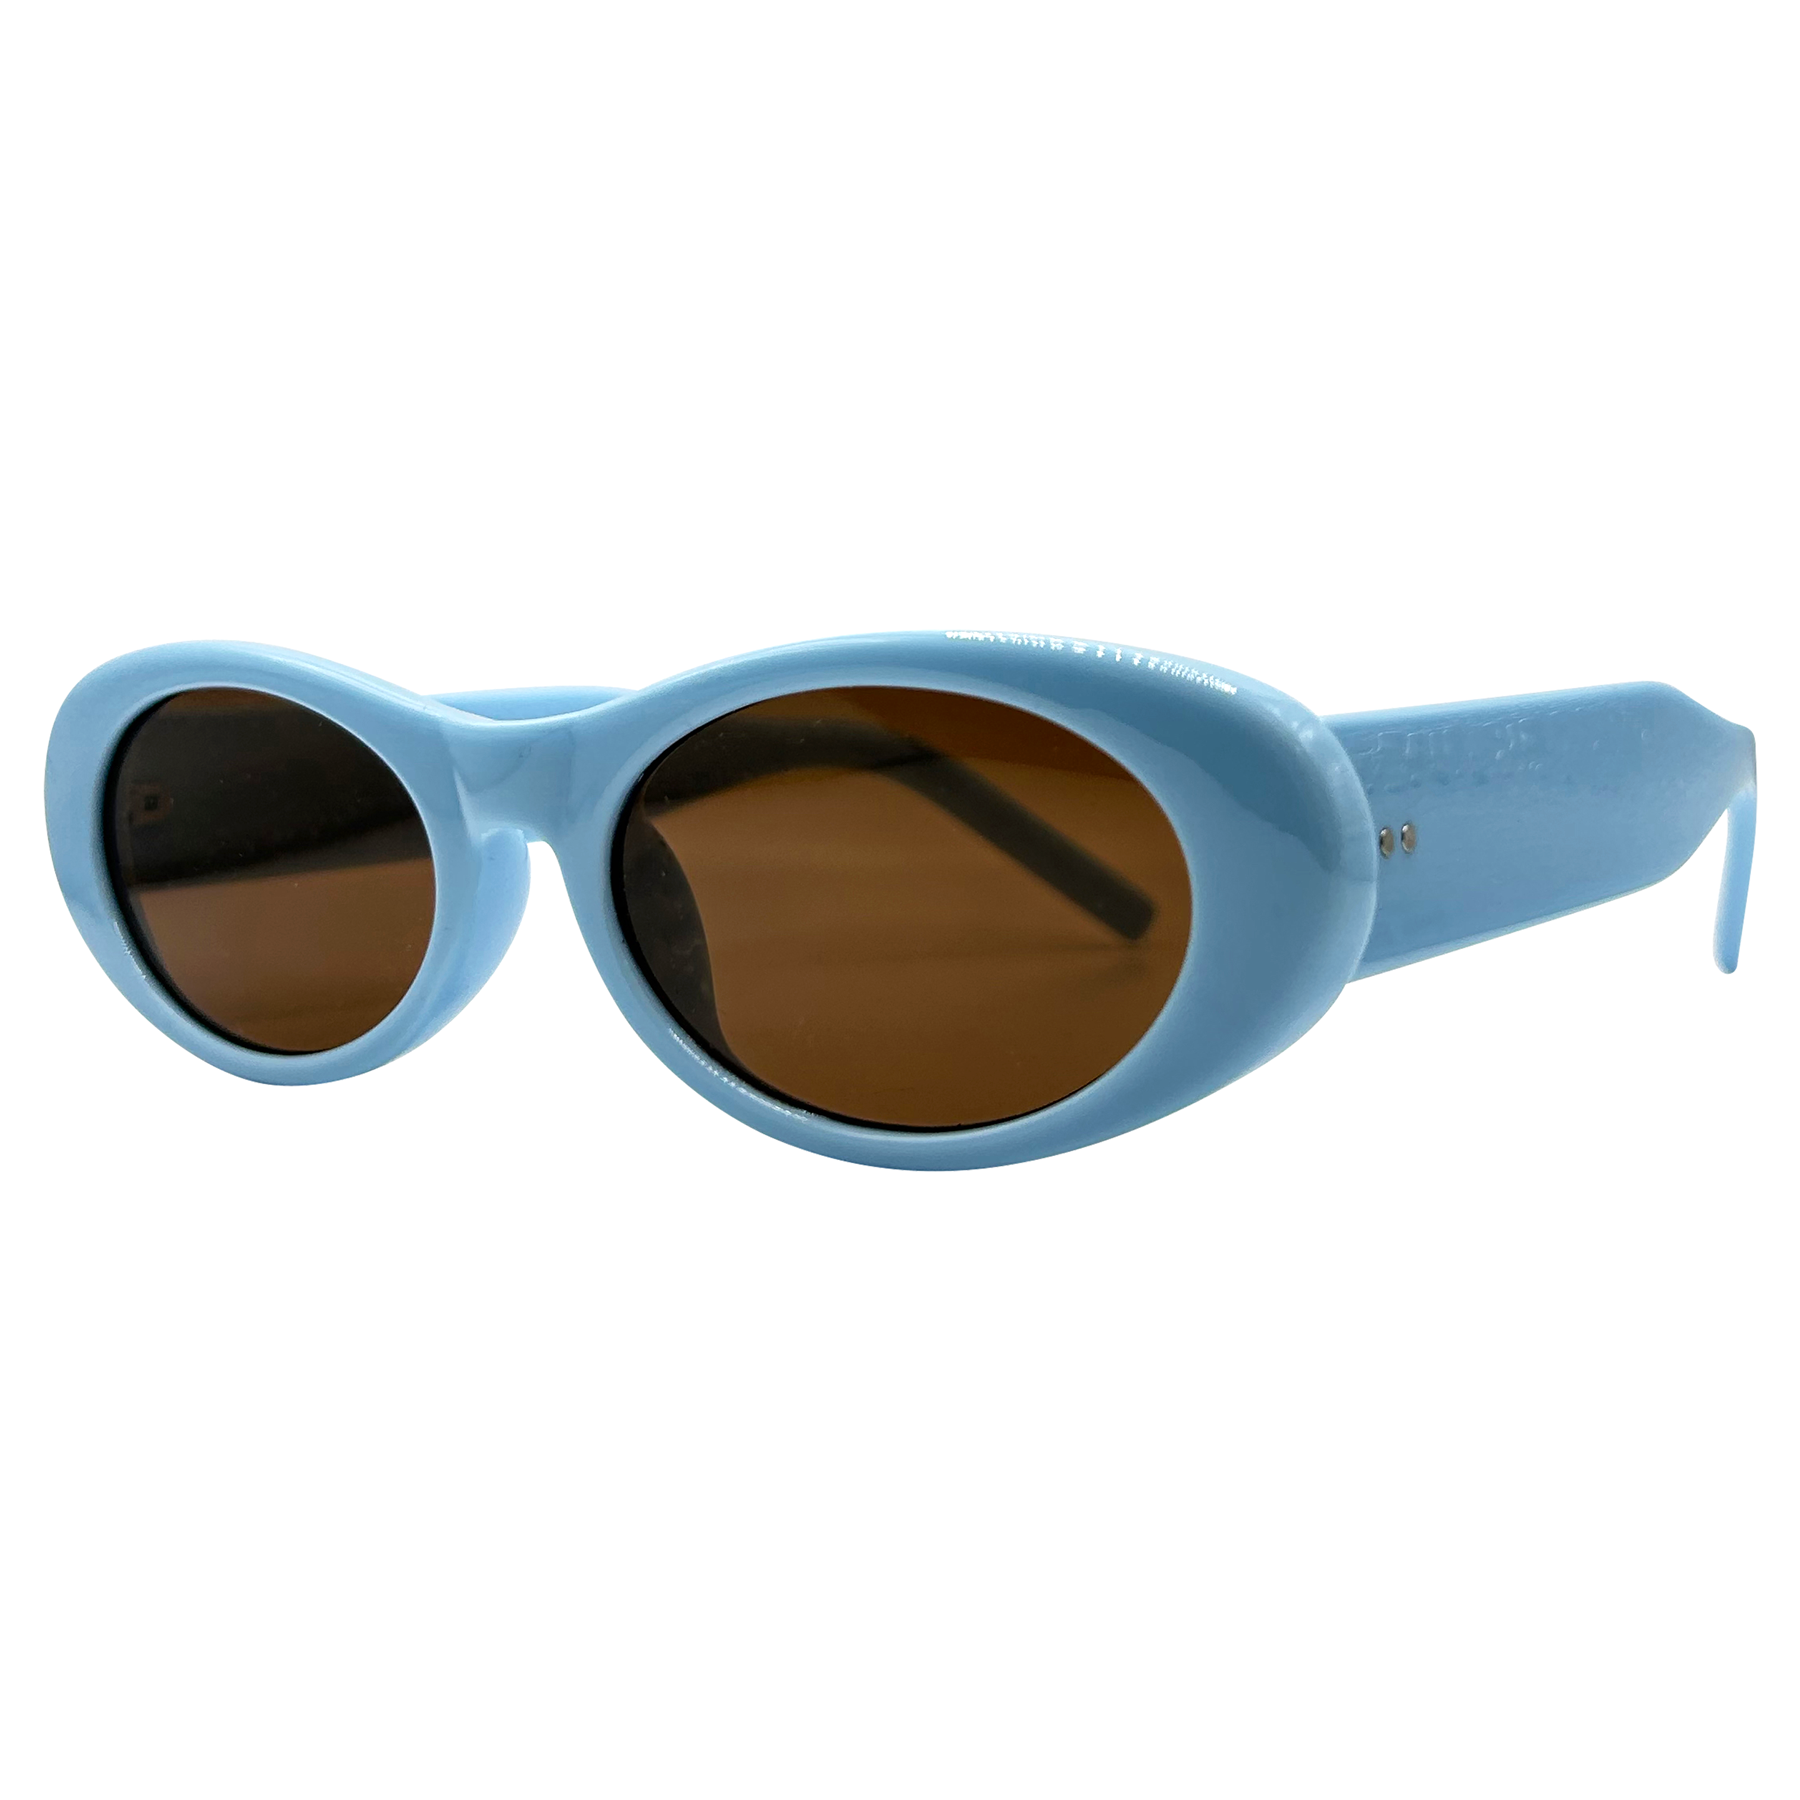 LUCY Oval Sunglasses